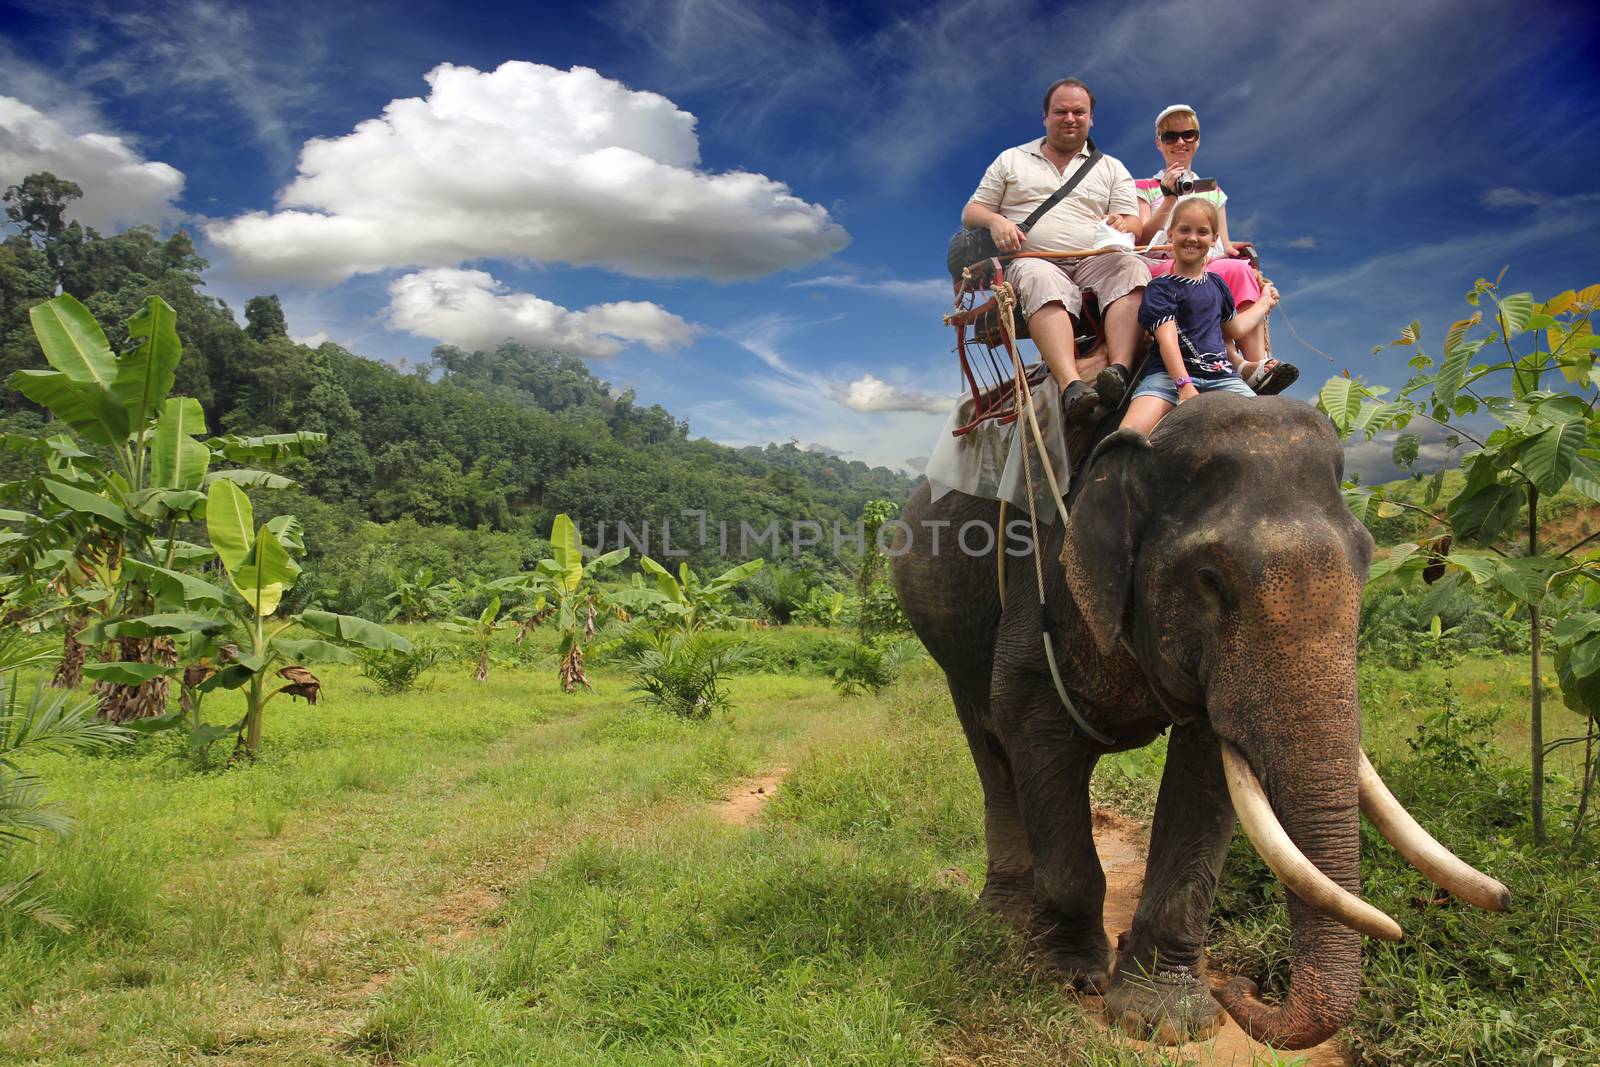 Riding an elephant. A young family with a child ride an elephant on a background of green jungle and a beautiful blue sky with clouds.